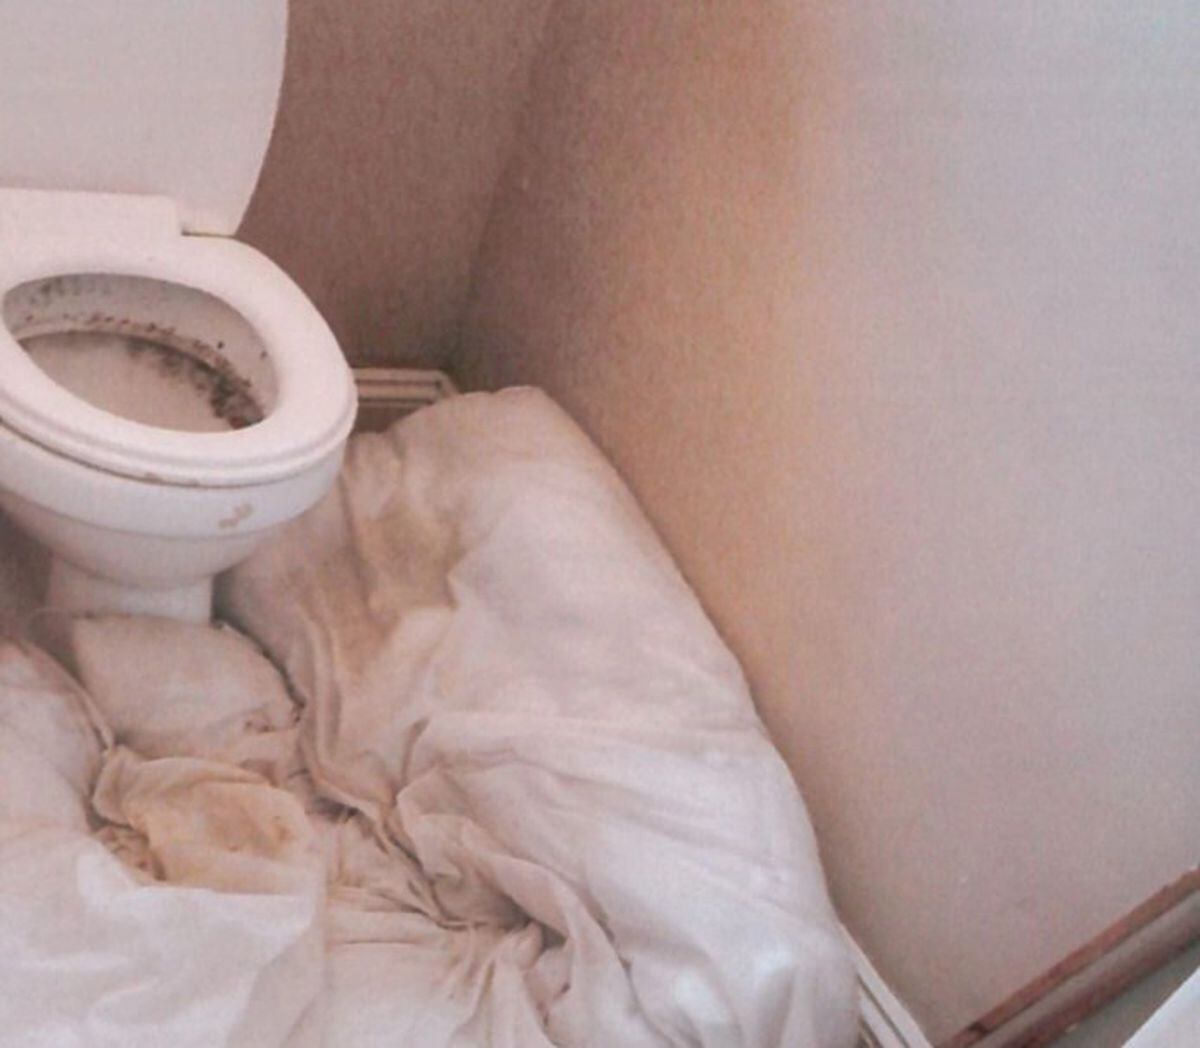 A leaky toilet which had to be plugged with an old duvet by the trafficking victims